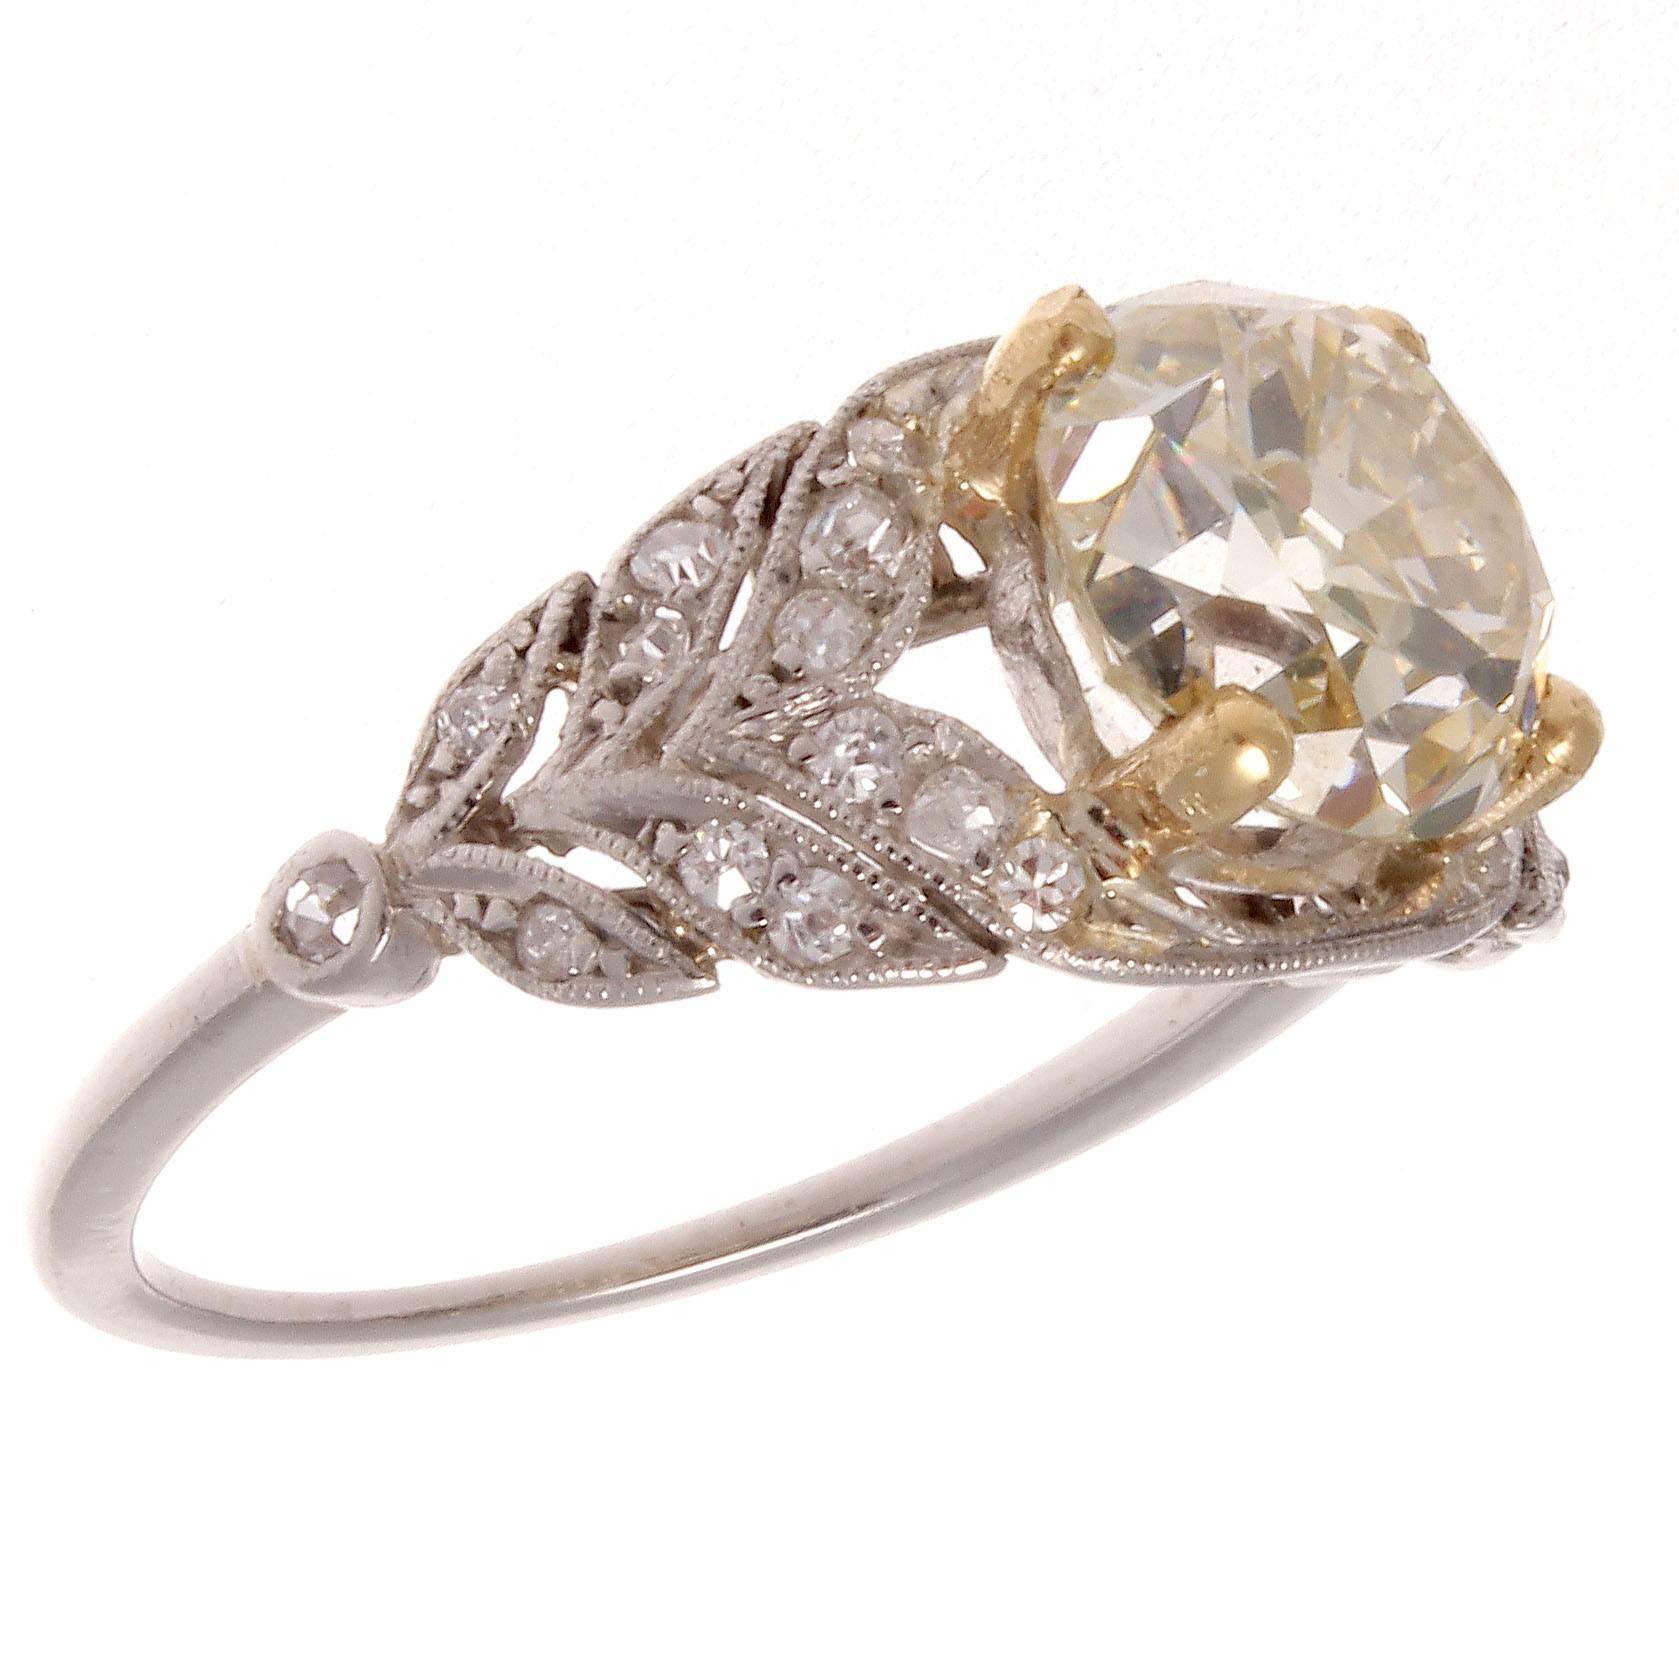 A sensual art deco creation with an emphasis on intricate design which defined the 1930's. Featuring a 2.59 carat old European cut diamond that exudes a fancy yellow color with well placed numerous near colorless diamonds. Hand crafted in platinum